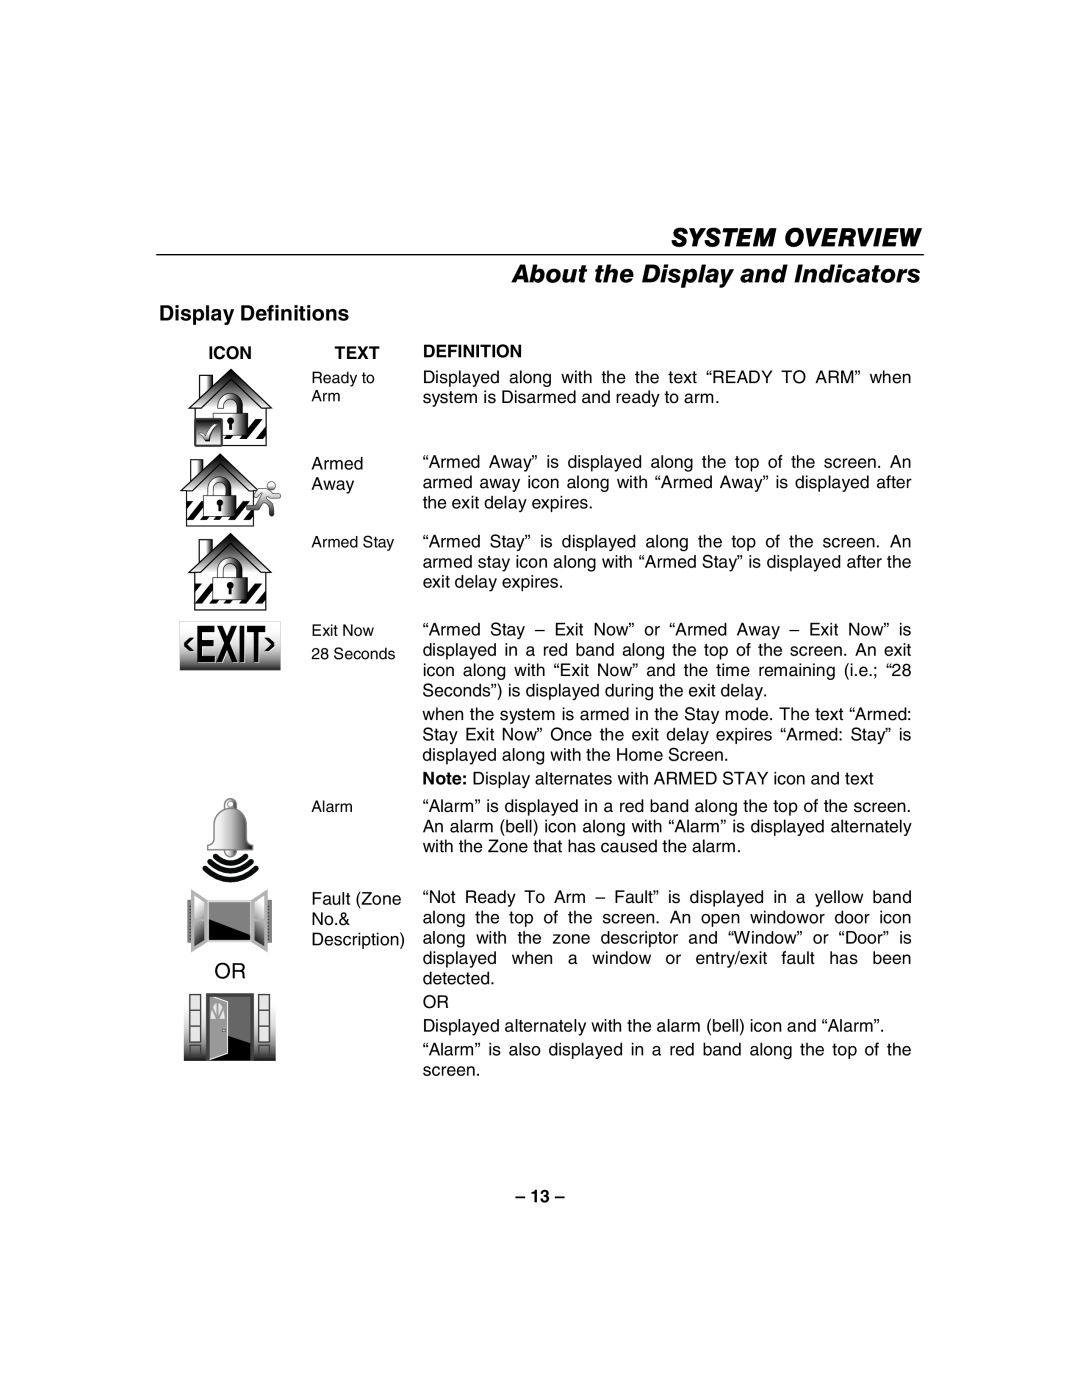 Honeywell 800-06894 manual System Overview, About the Display and Indicators, Display Definitions, Icontext 